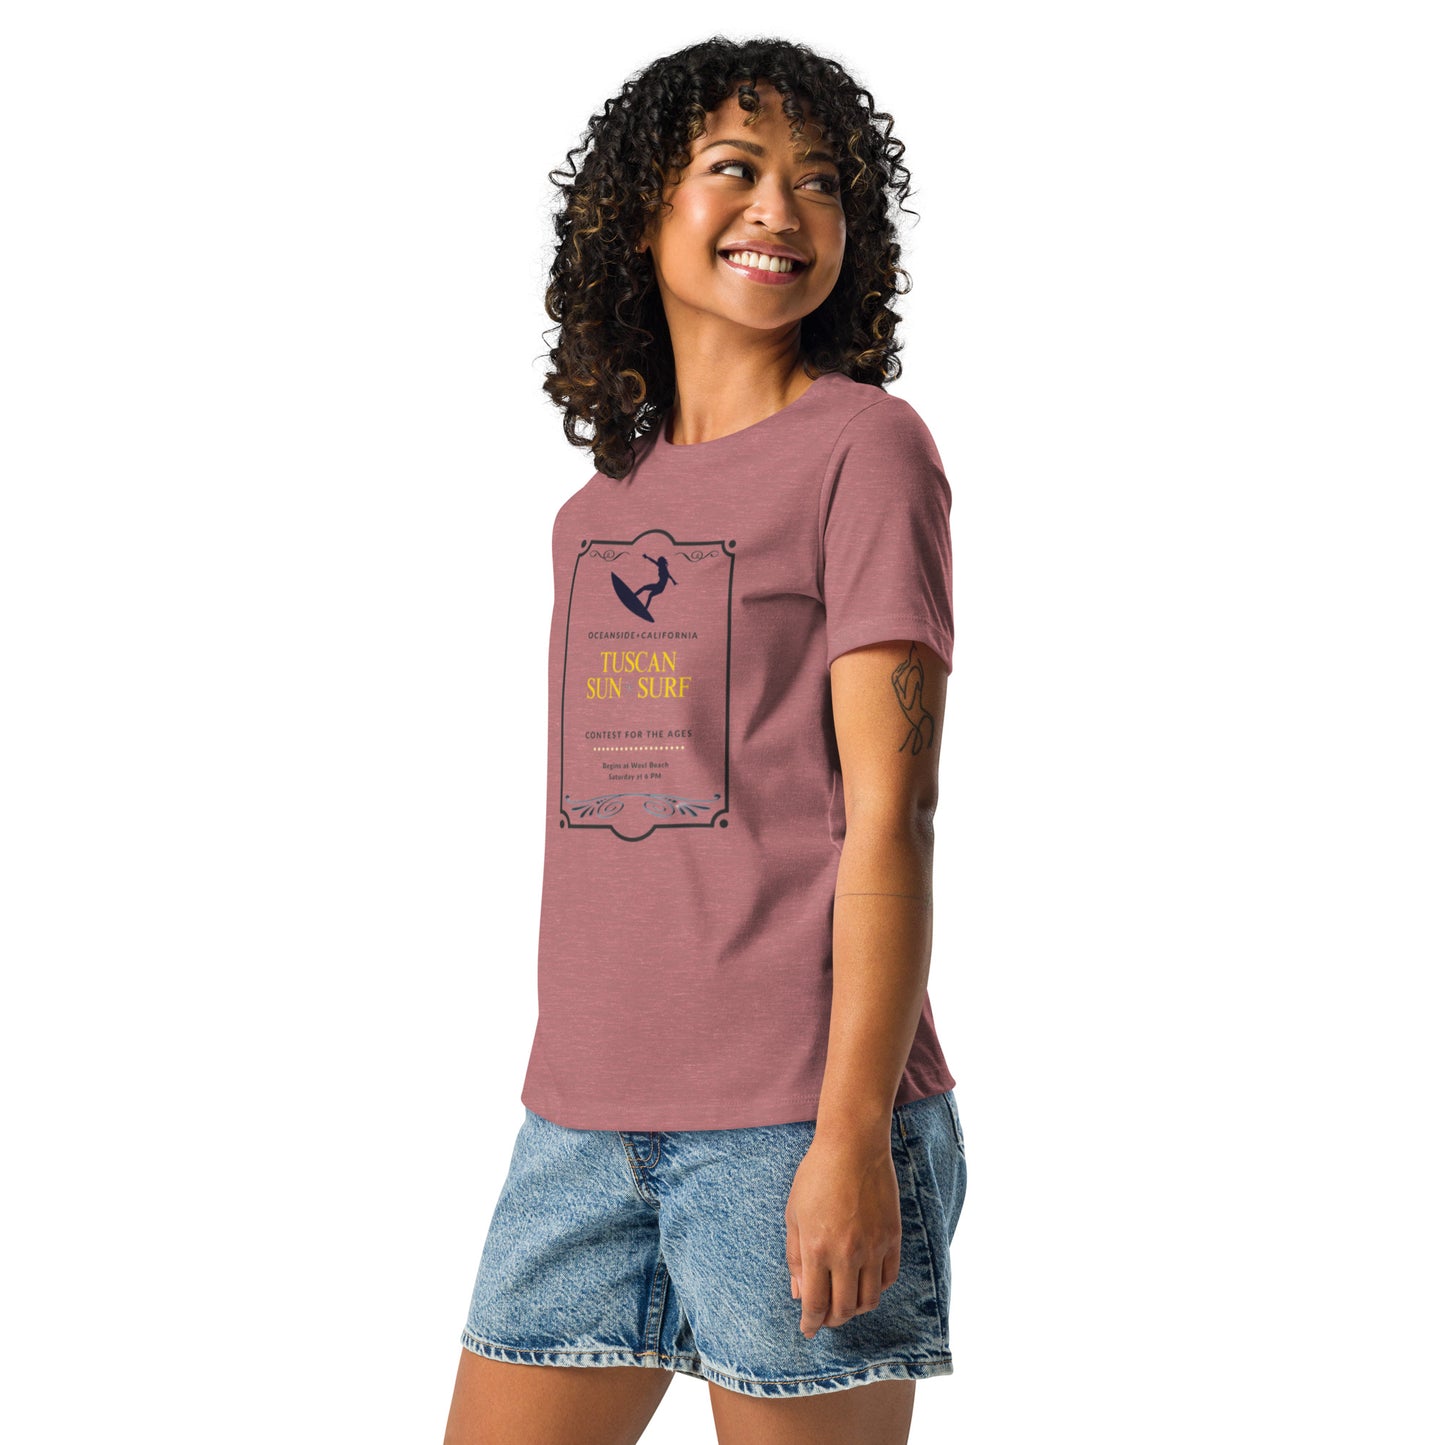 Surf Contest Women's Relaxed T-Shirt